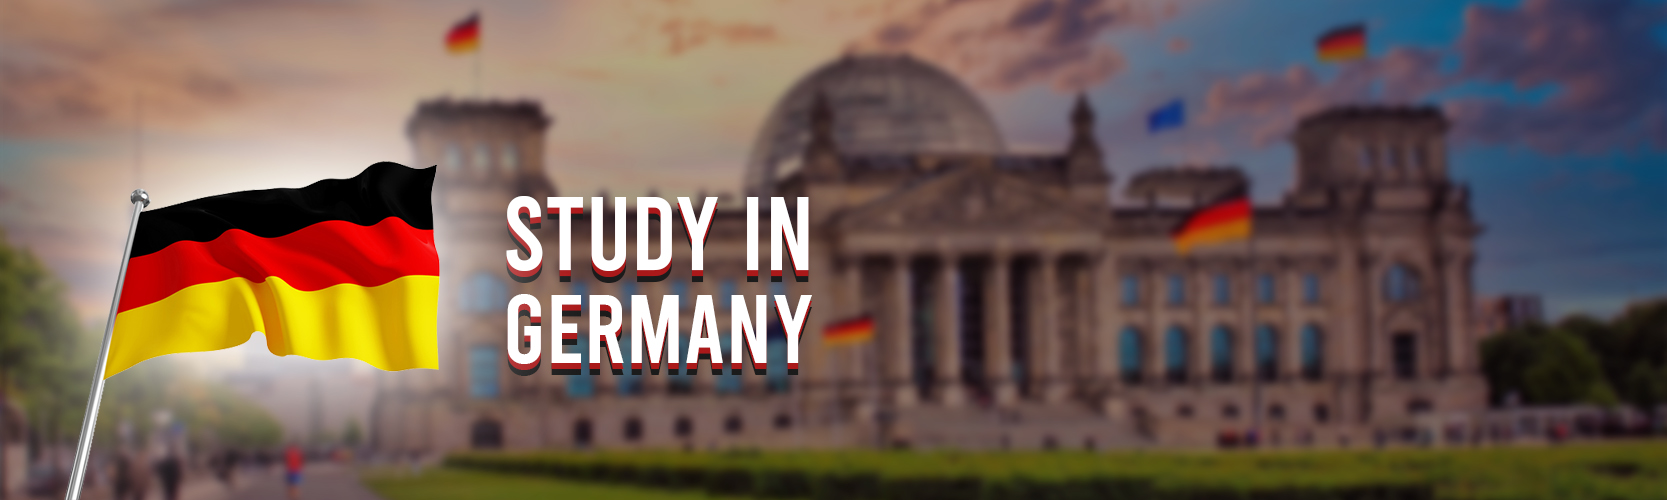 Want to Study a PhD in Germany? - Bevuz